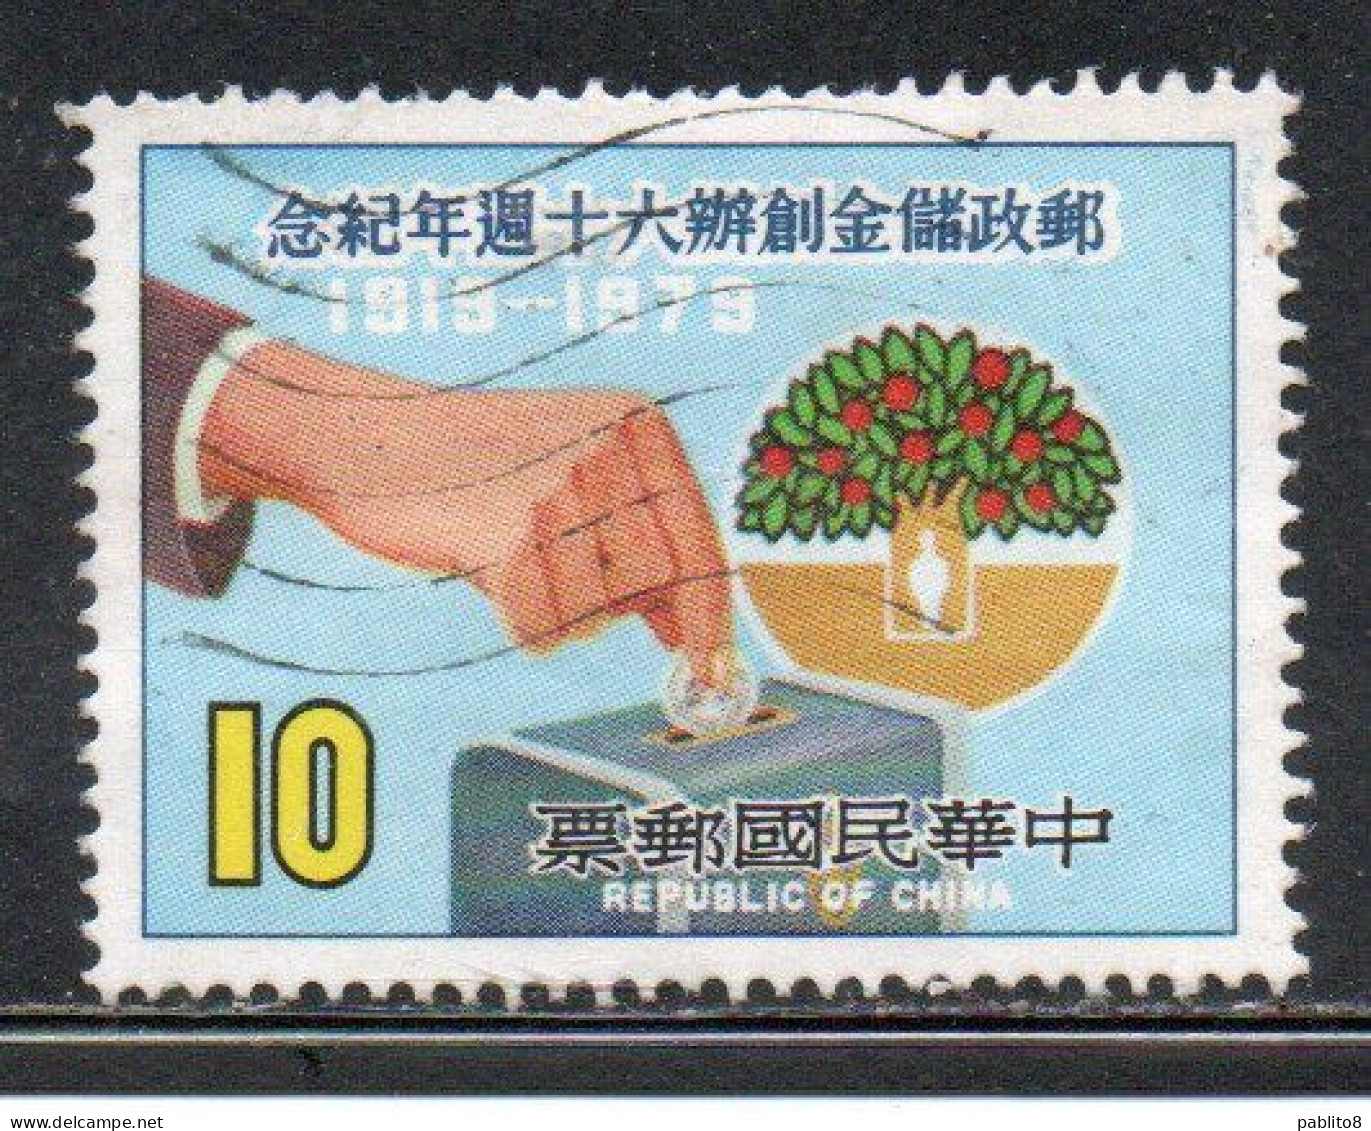 CHINA REPUBLIC CINA TAIWAN FORMOSA 1979 POSTAL SAVINGS HAND PUTTING COIN IN BANK 10$ USED USATO OBLITERE' - Oblitérés